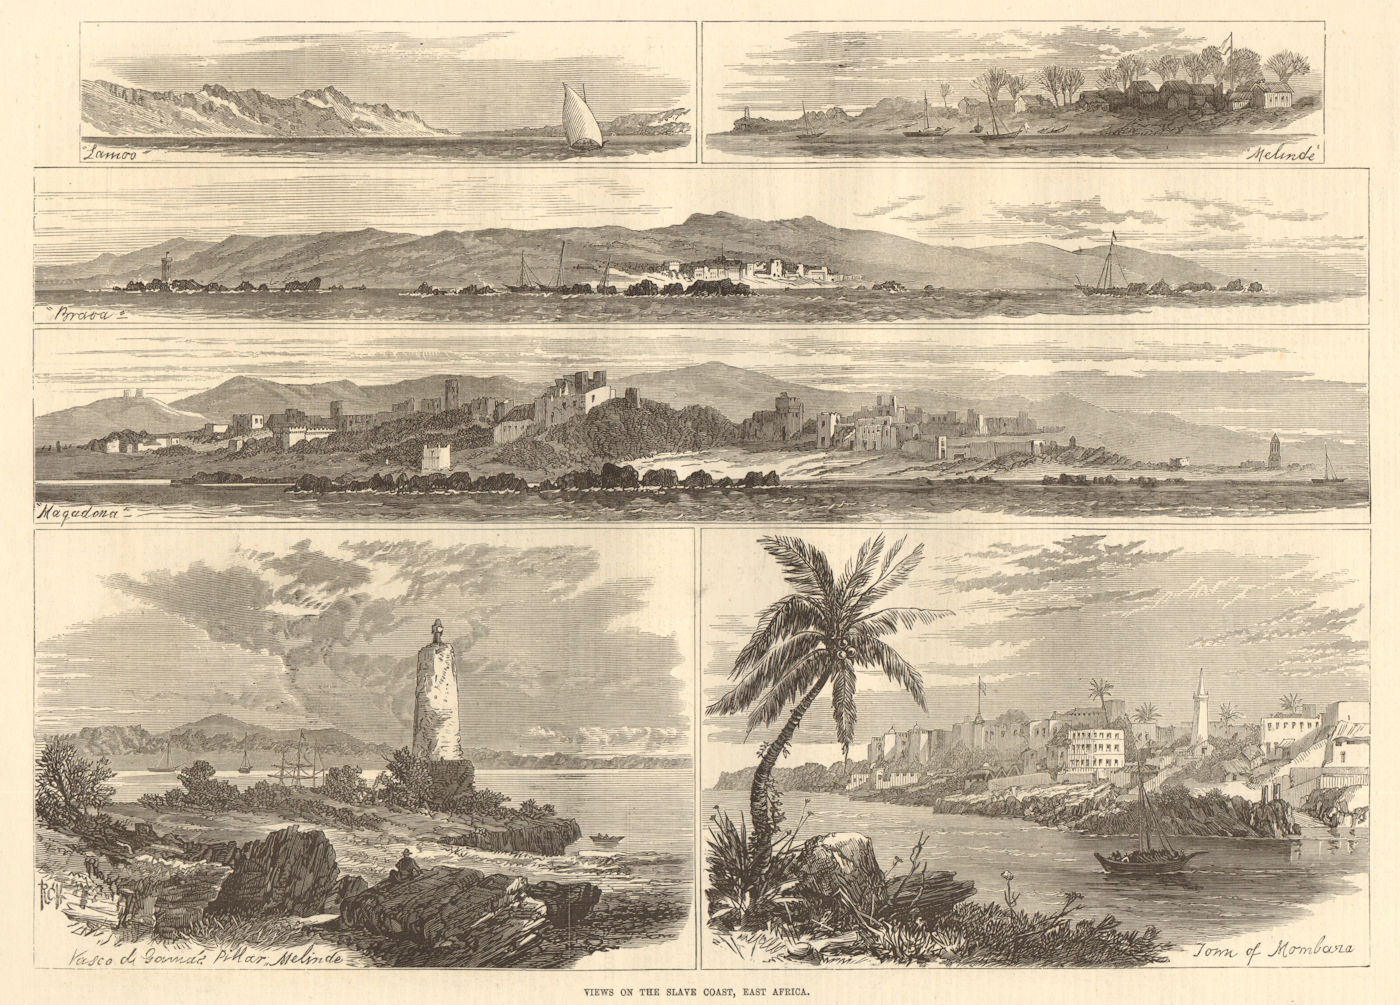 Associate Product Views on the Slave Coast, east Africa 1875 antique ILN full page print